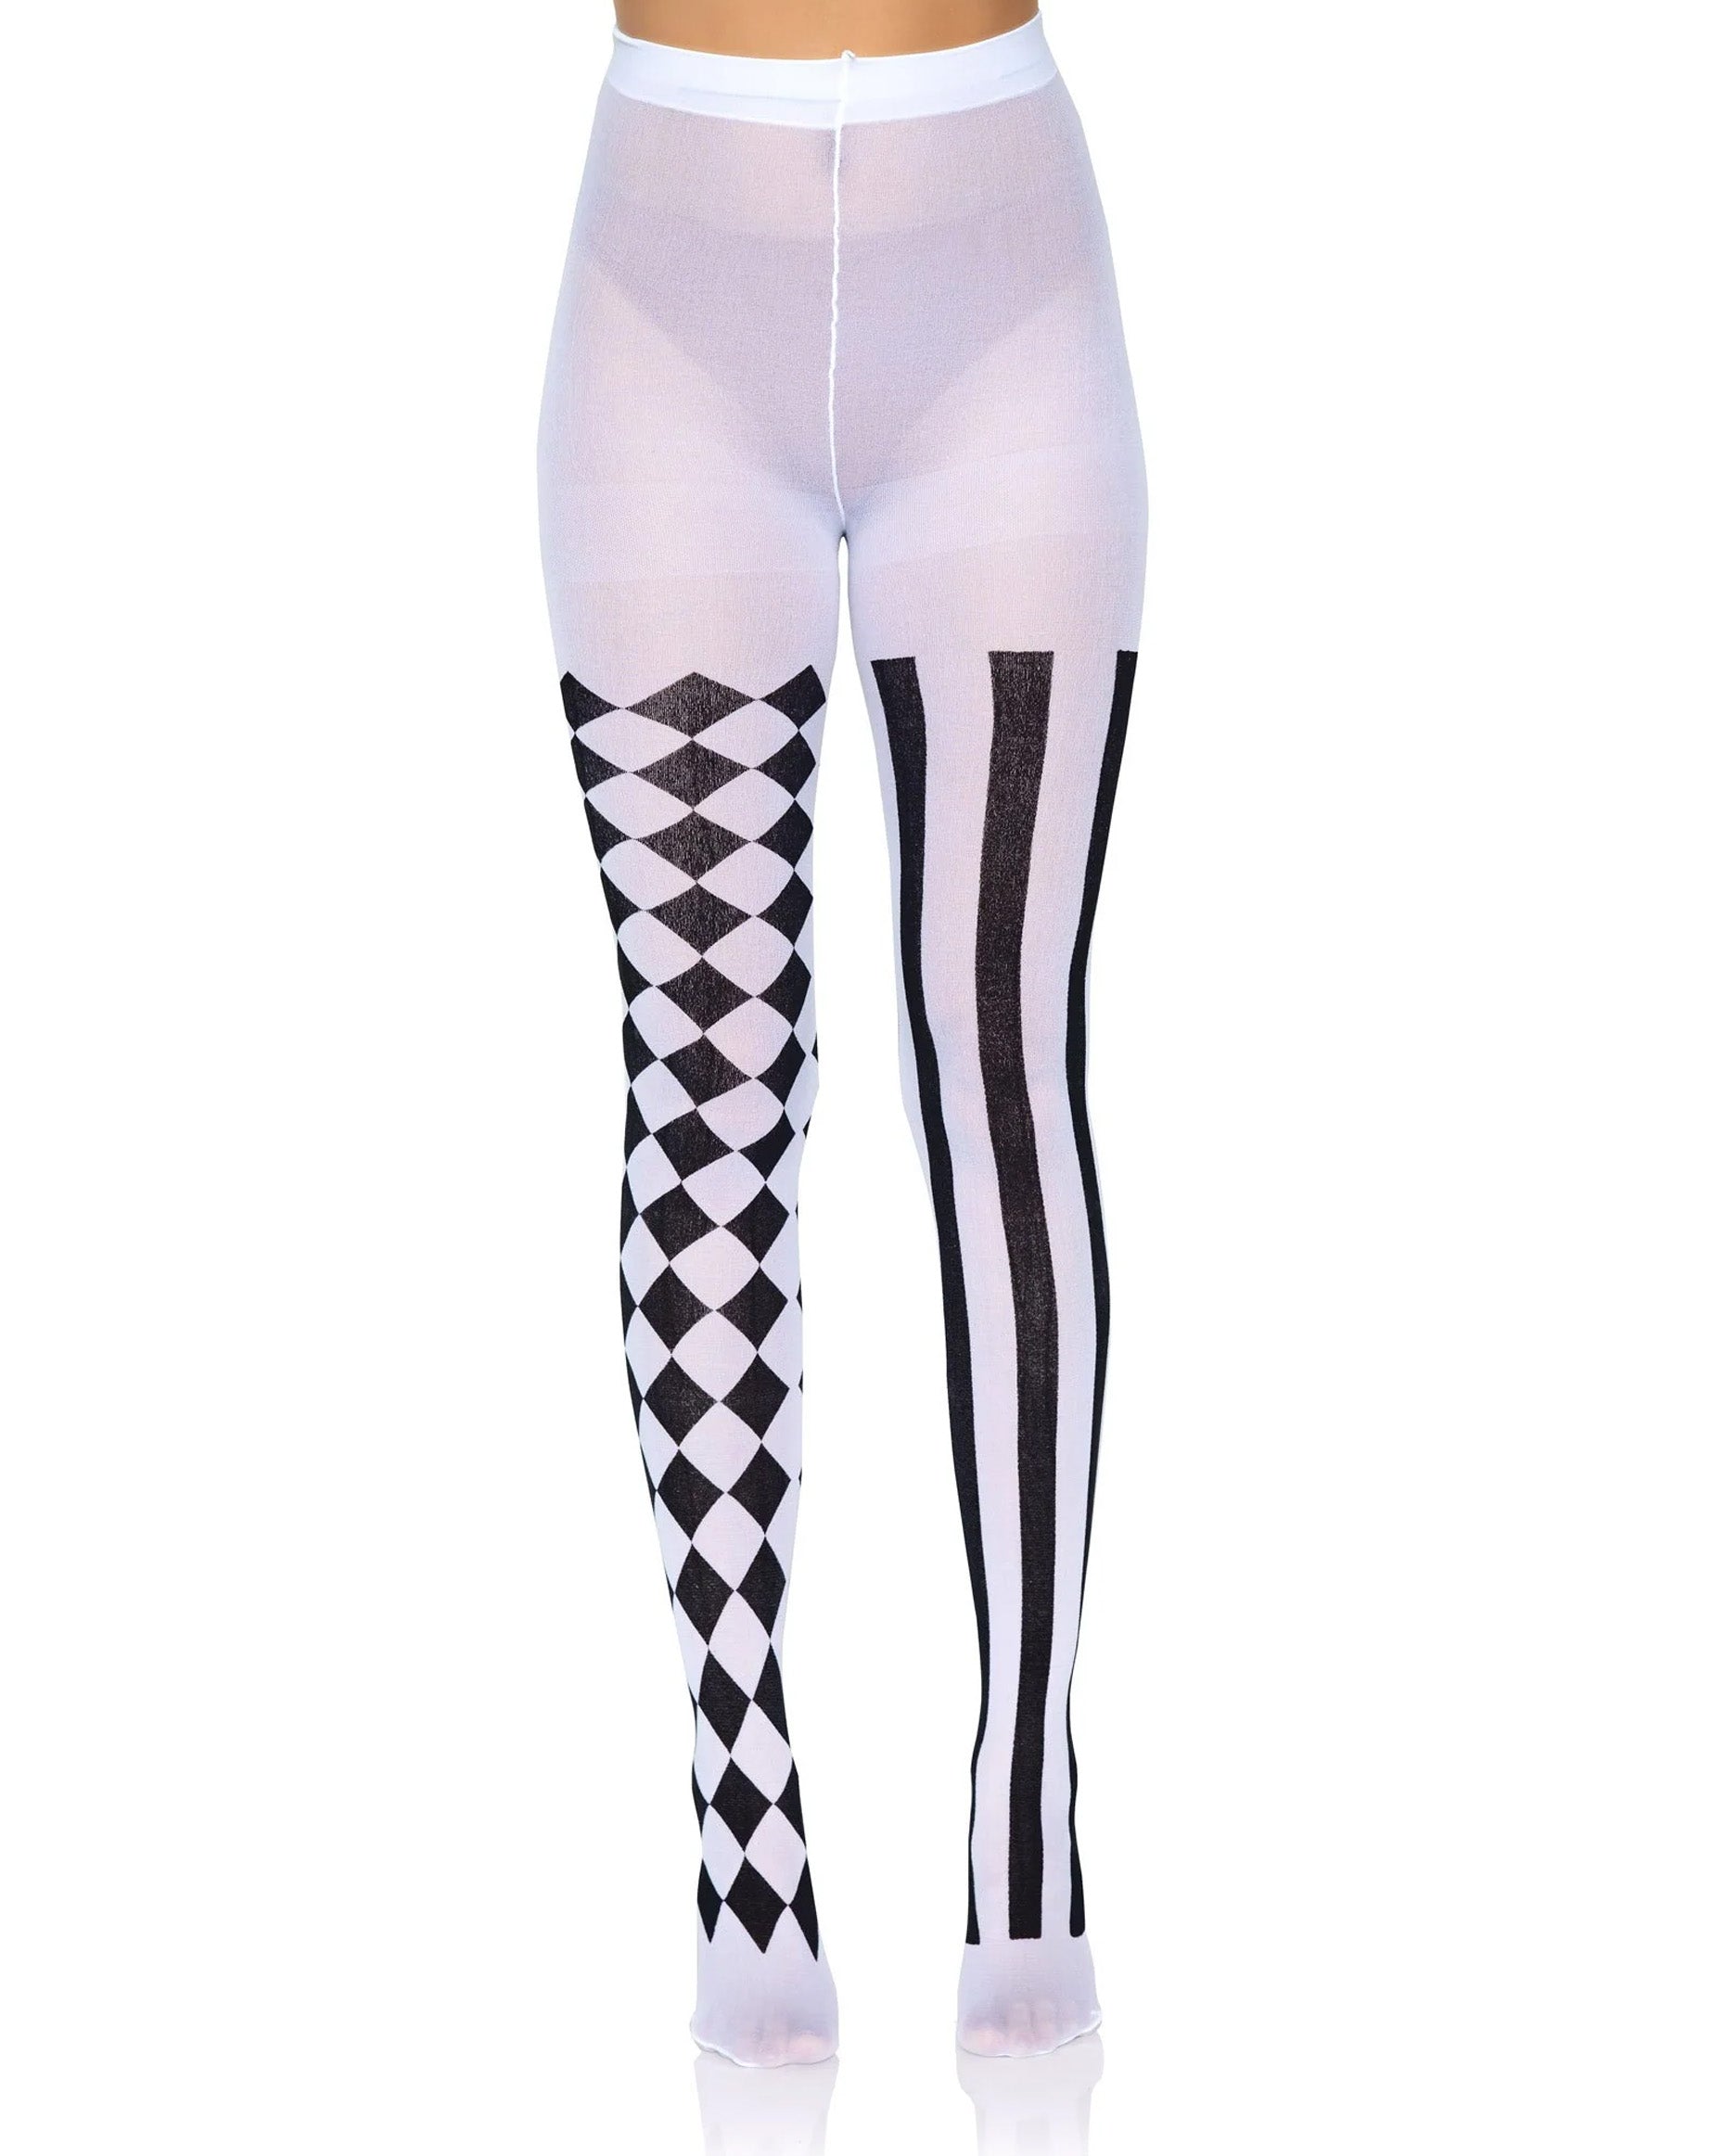 Leg Avenue 7720 Harlequin Tights - White opaque tights with a black print, one leg has vertical stripes and the other is a checkered pattern. Perfect for Halloween.